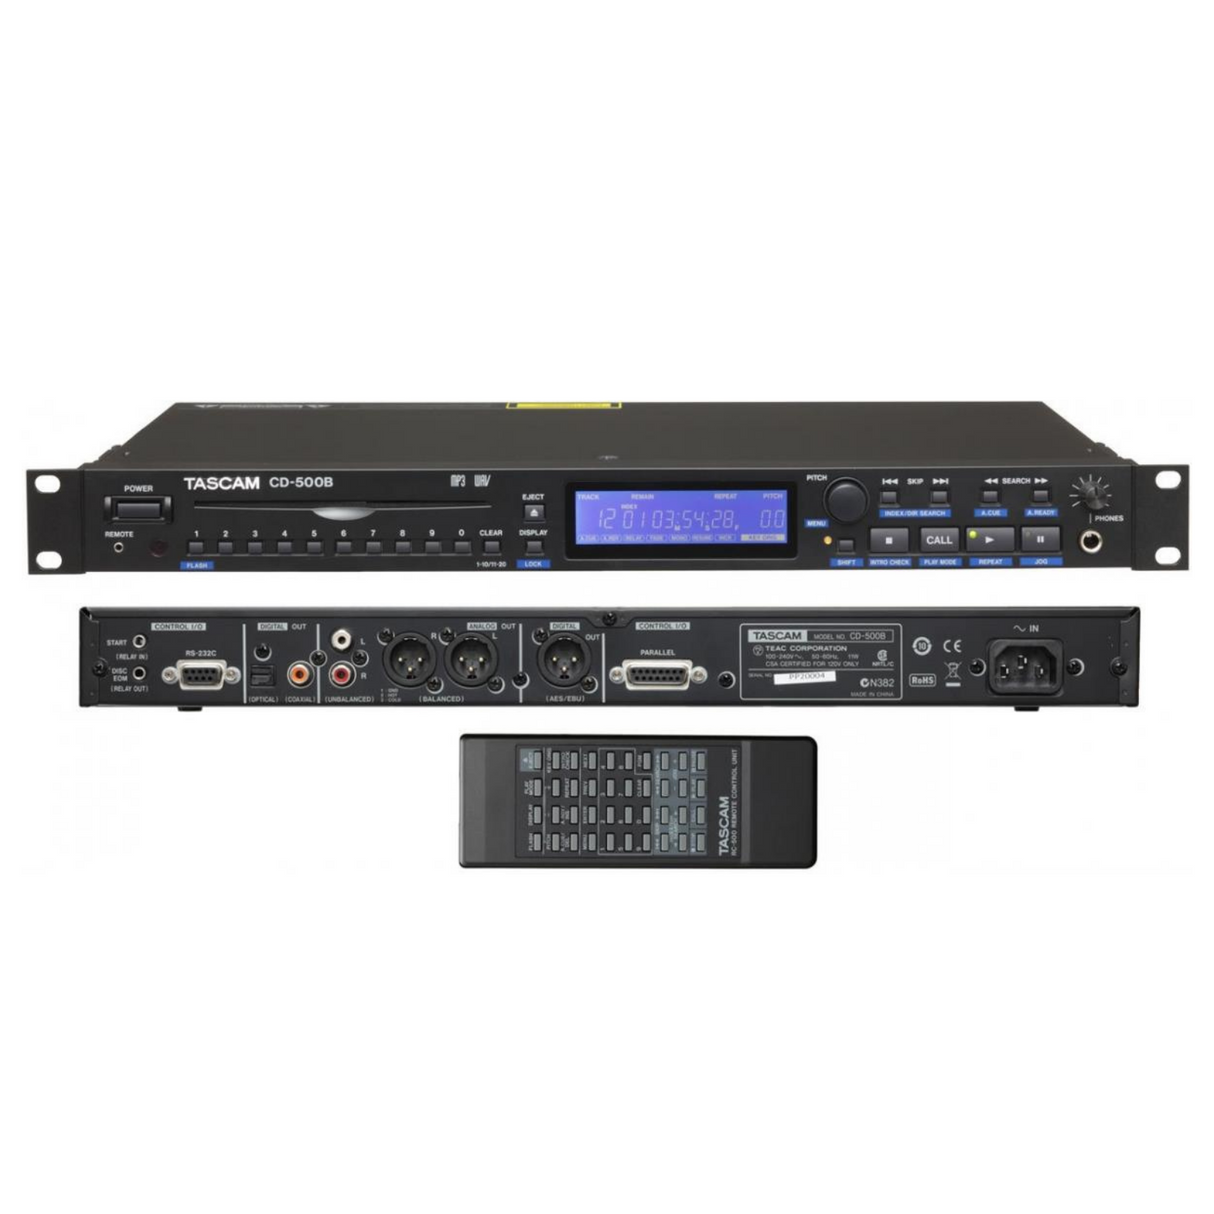 Tascam professional CD player with balanced outputs (1U)